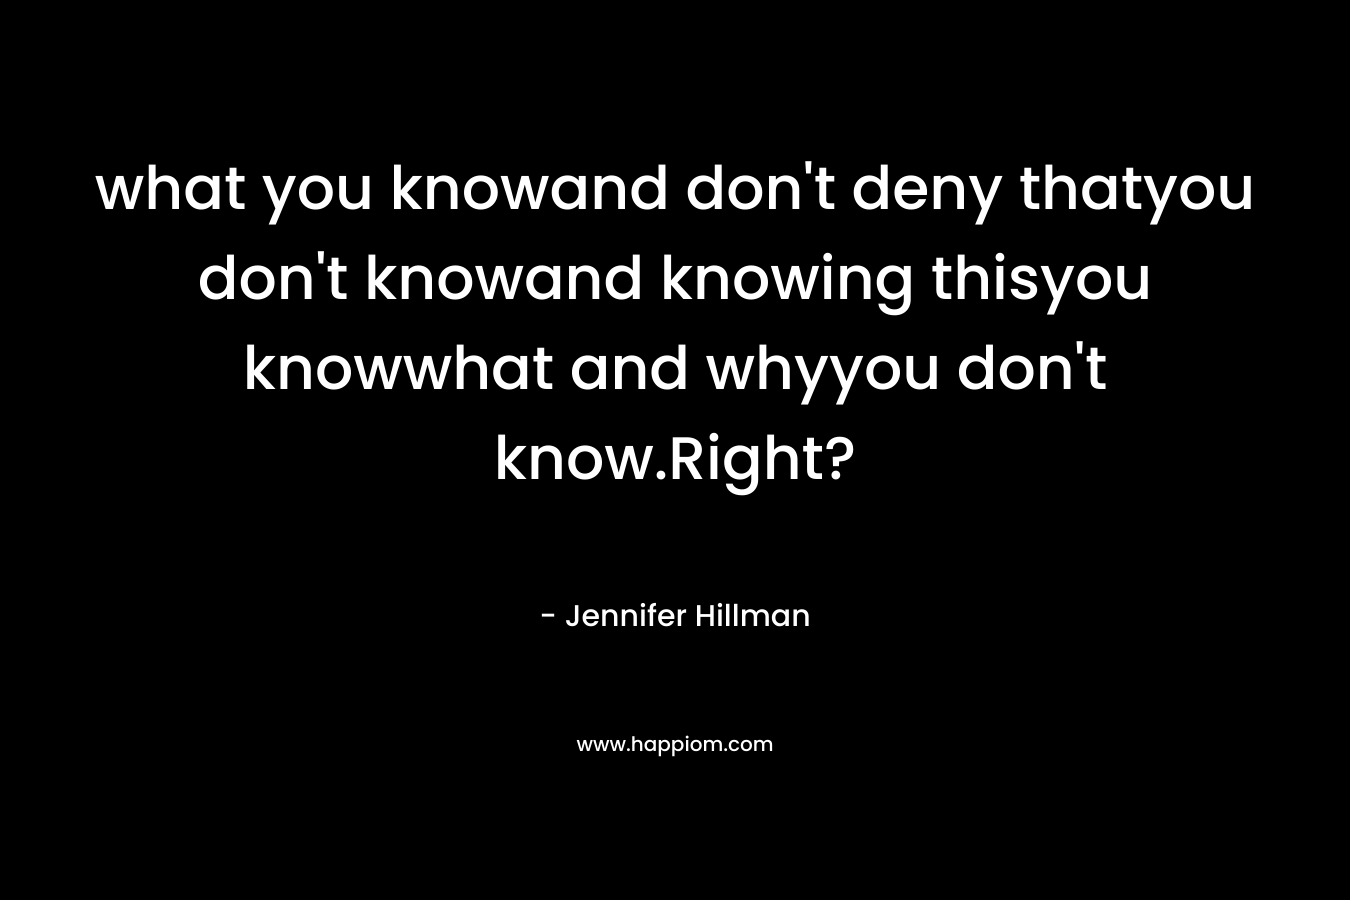 what you knowand don't deny thatyou don't knowand knowing thisyou knowwhat and whyyou don't know.Right?